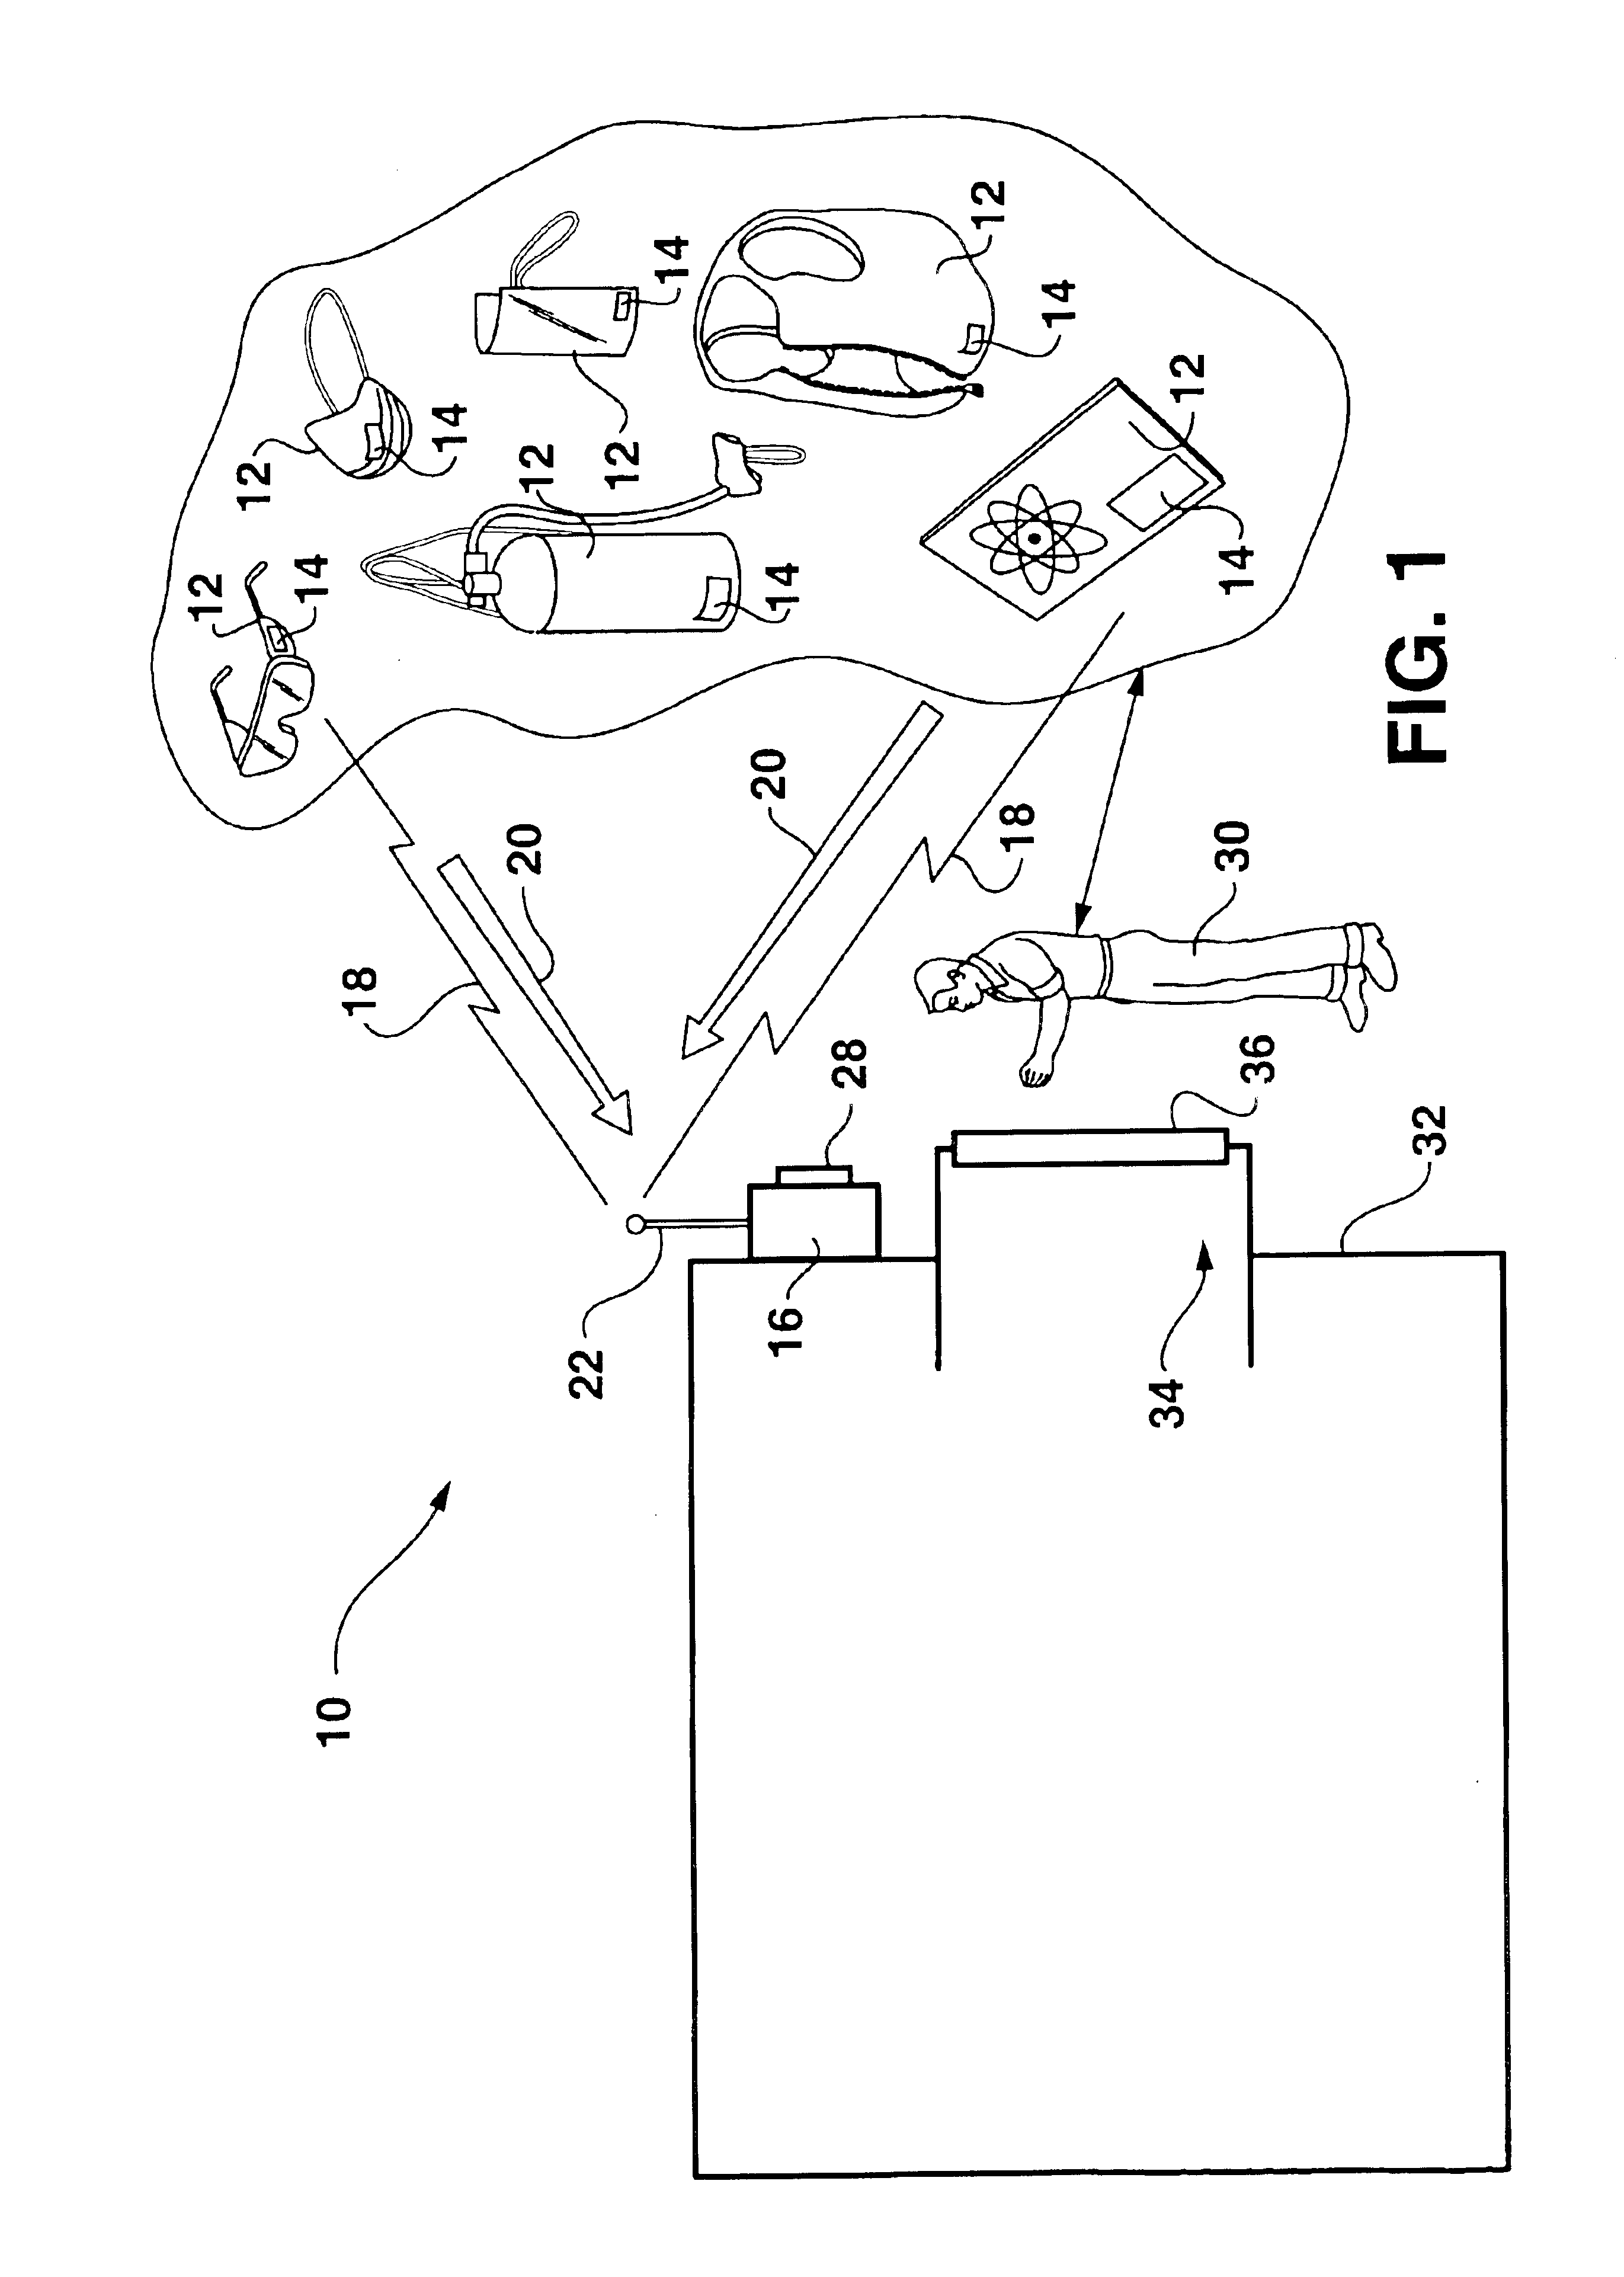 RFID system and method for ensuring personnel safety